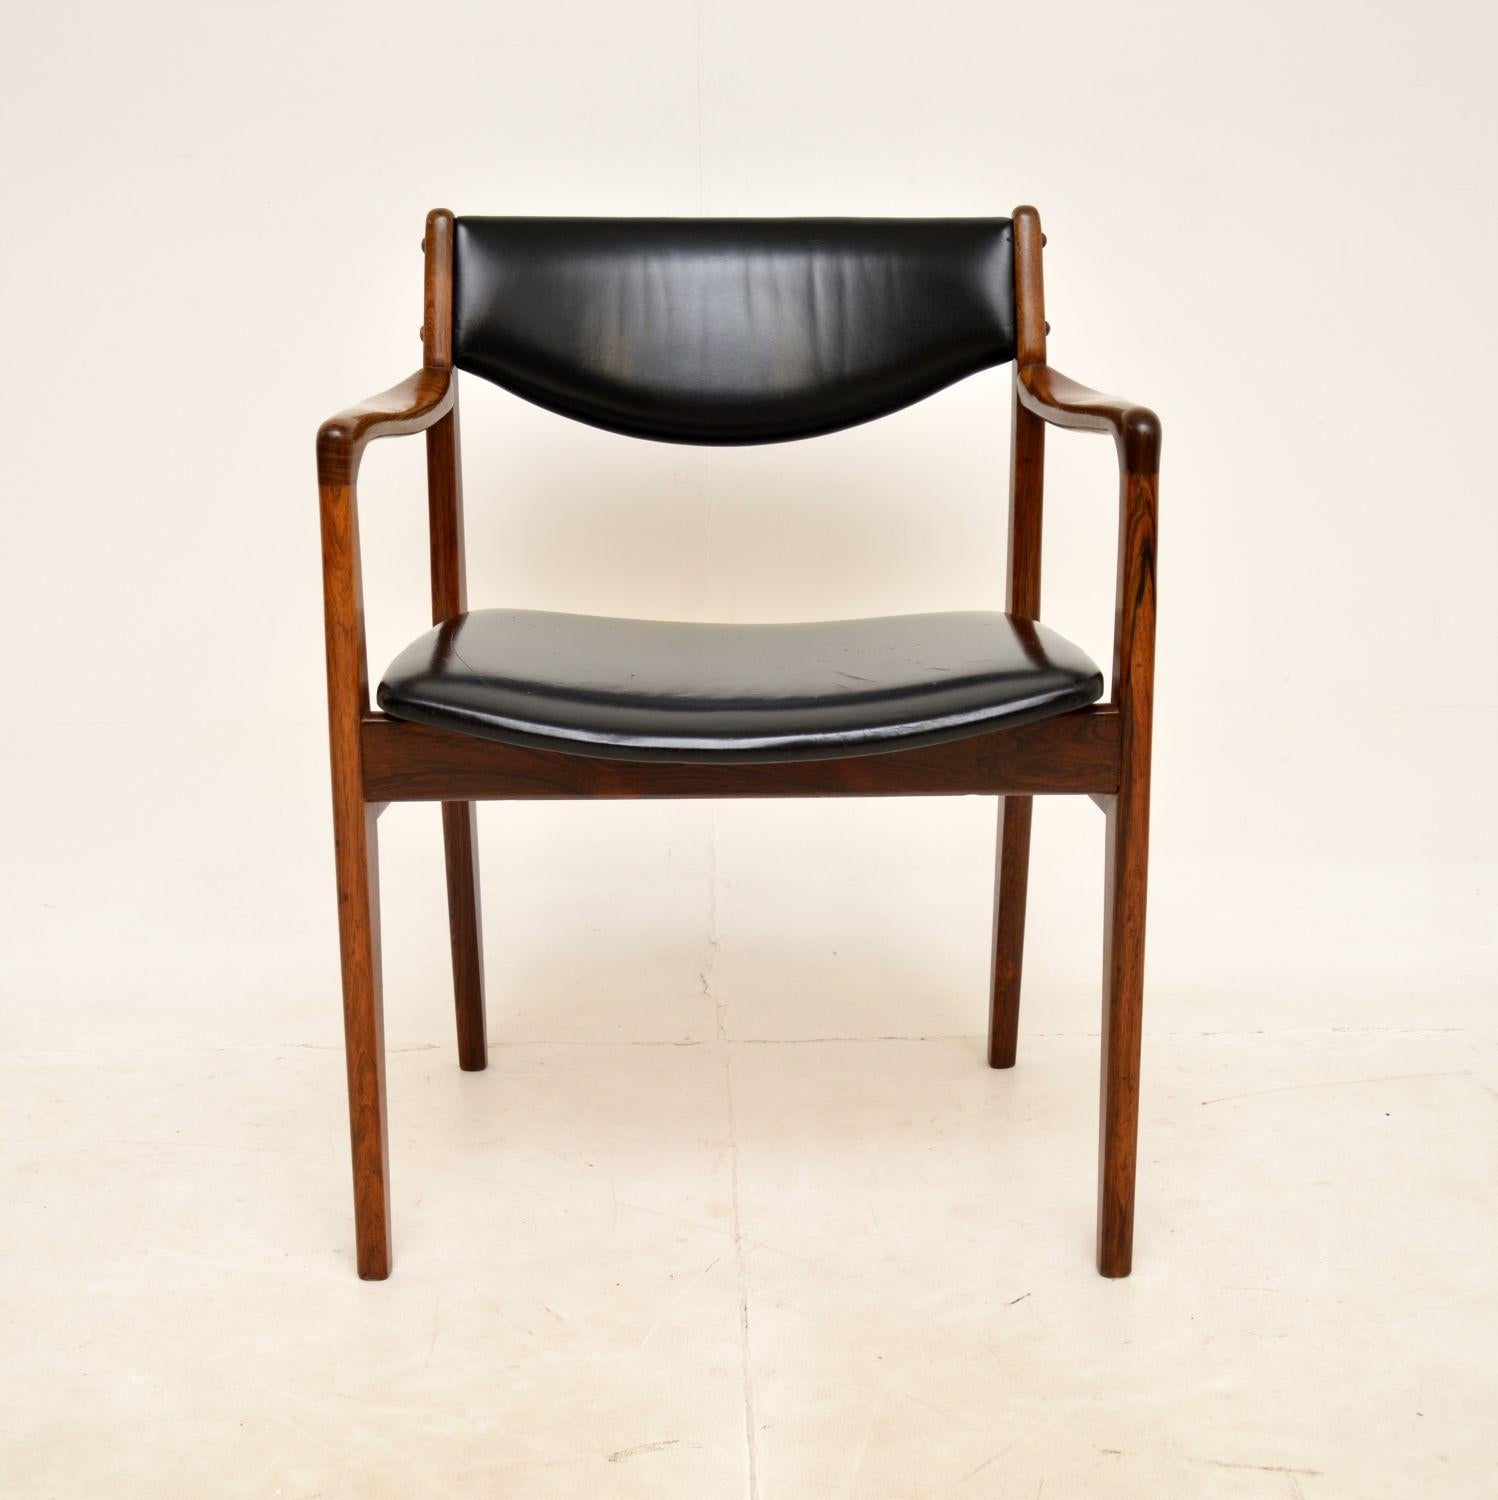 A superb vintage Danish vintage carver armchair in solid wood and black leather. This was made in Denmark by Godtfred H Petersen in the 1960s.
It is of amazing quality, with a gorgeous sweeping frame and high quality leather upholstery. The colour